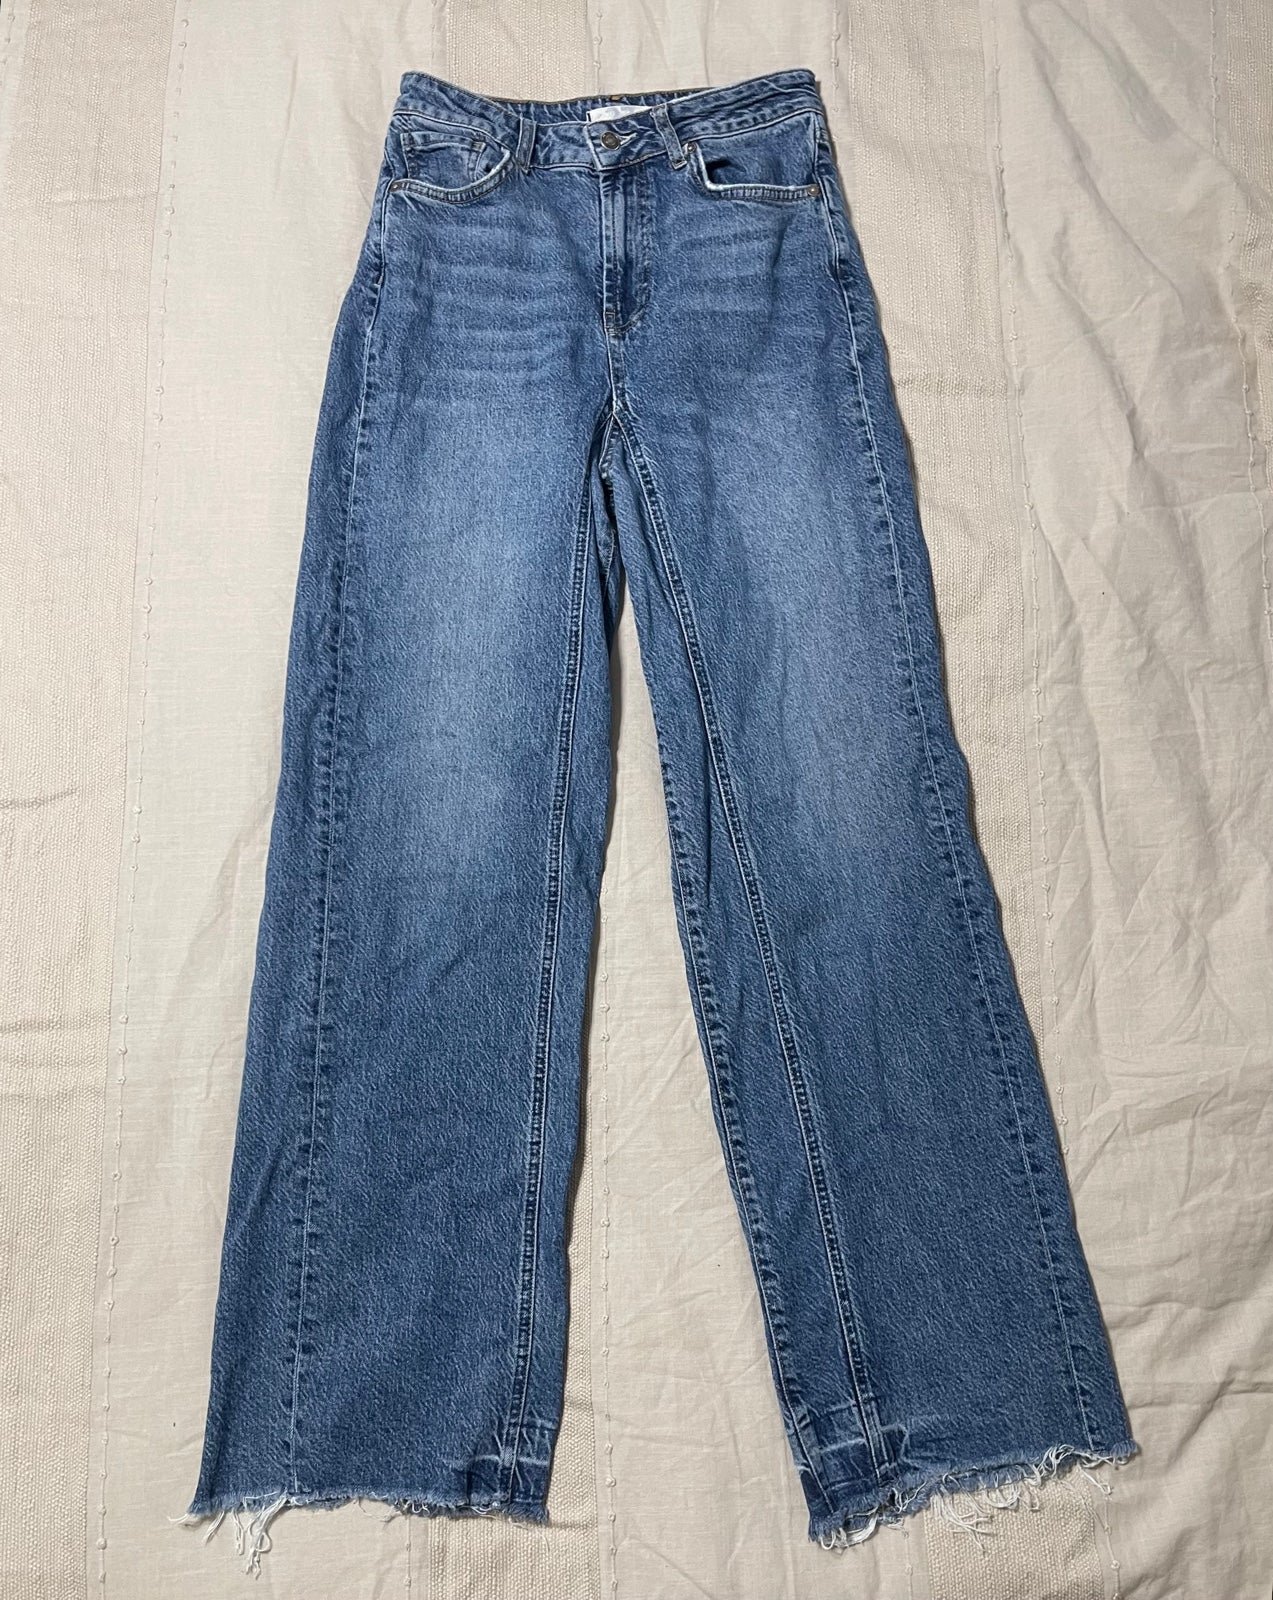 floor price Free People wide leg jeans JT2nFuzK7 just for you